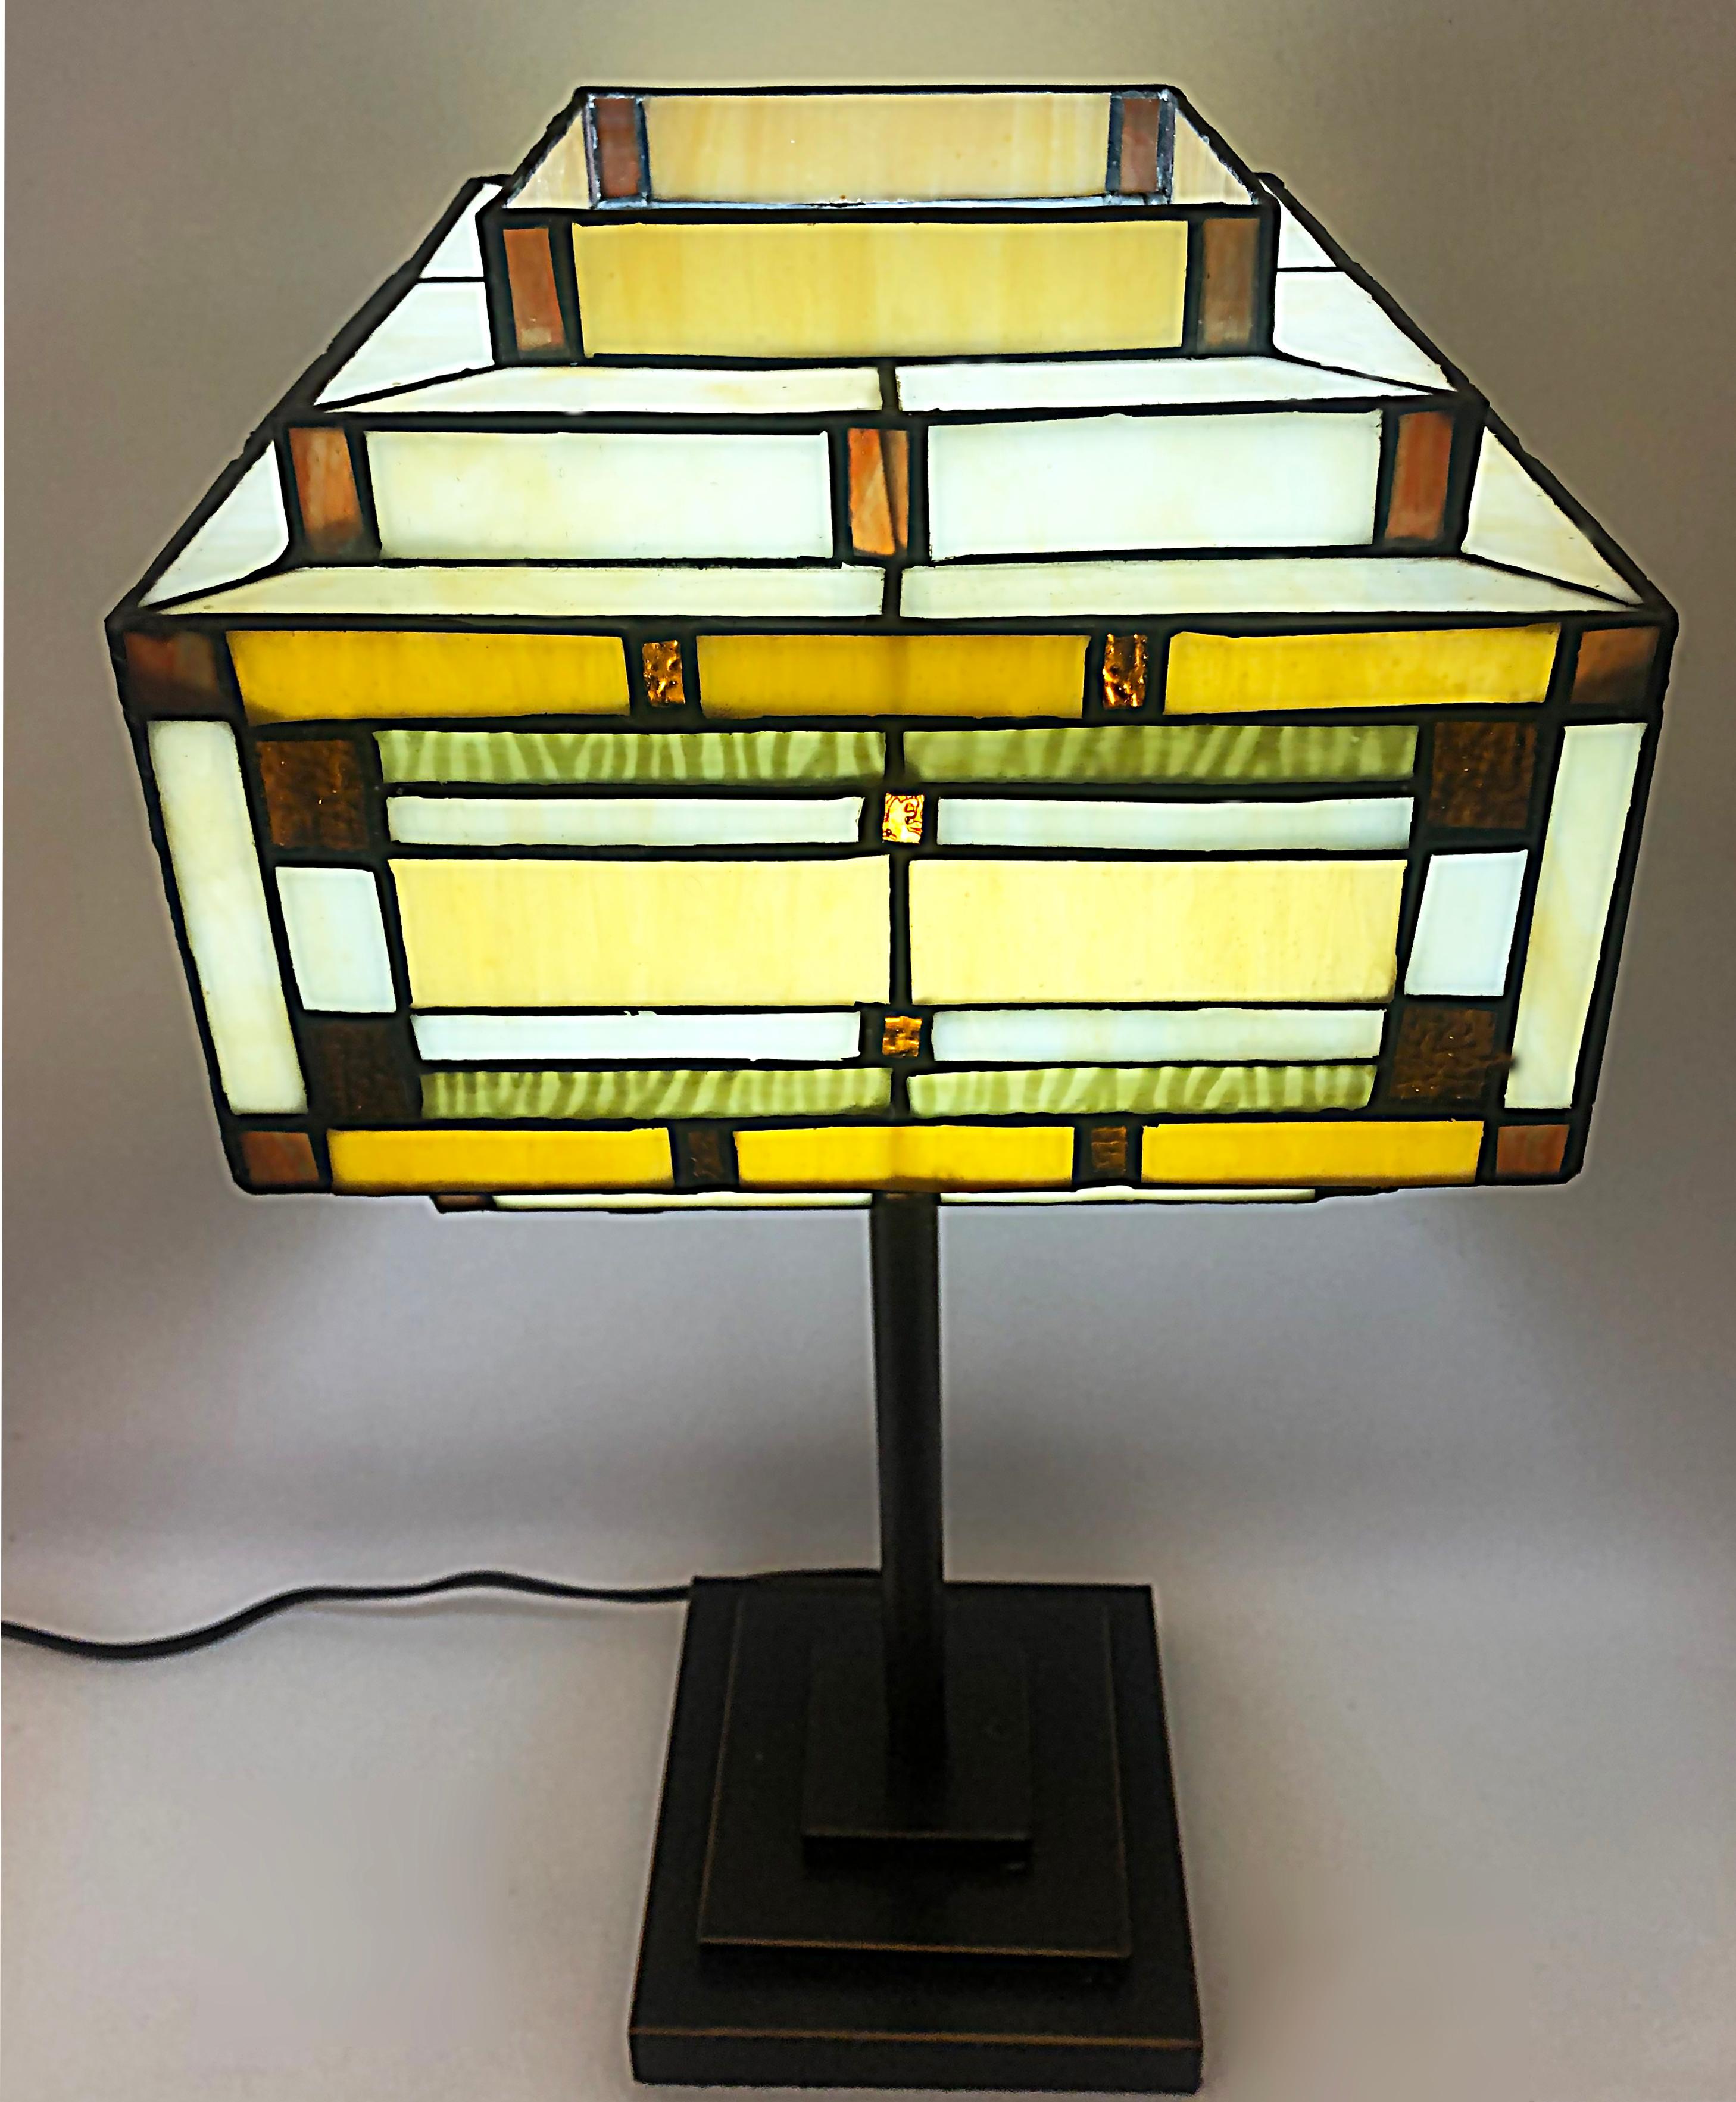 Contemporary Arts & Crafts Style Table Lamps with Stained Glass Shades, Patinated Metal Bases